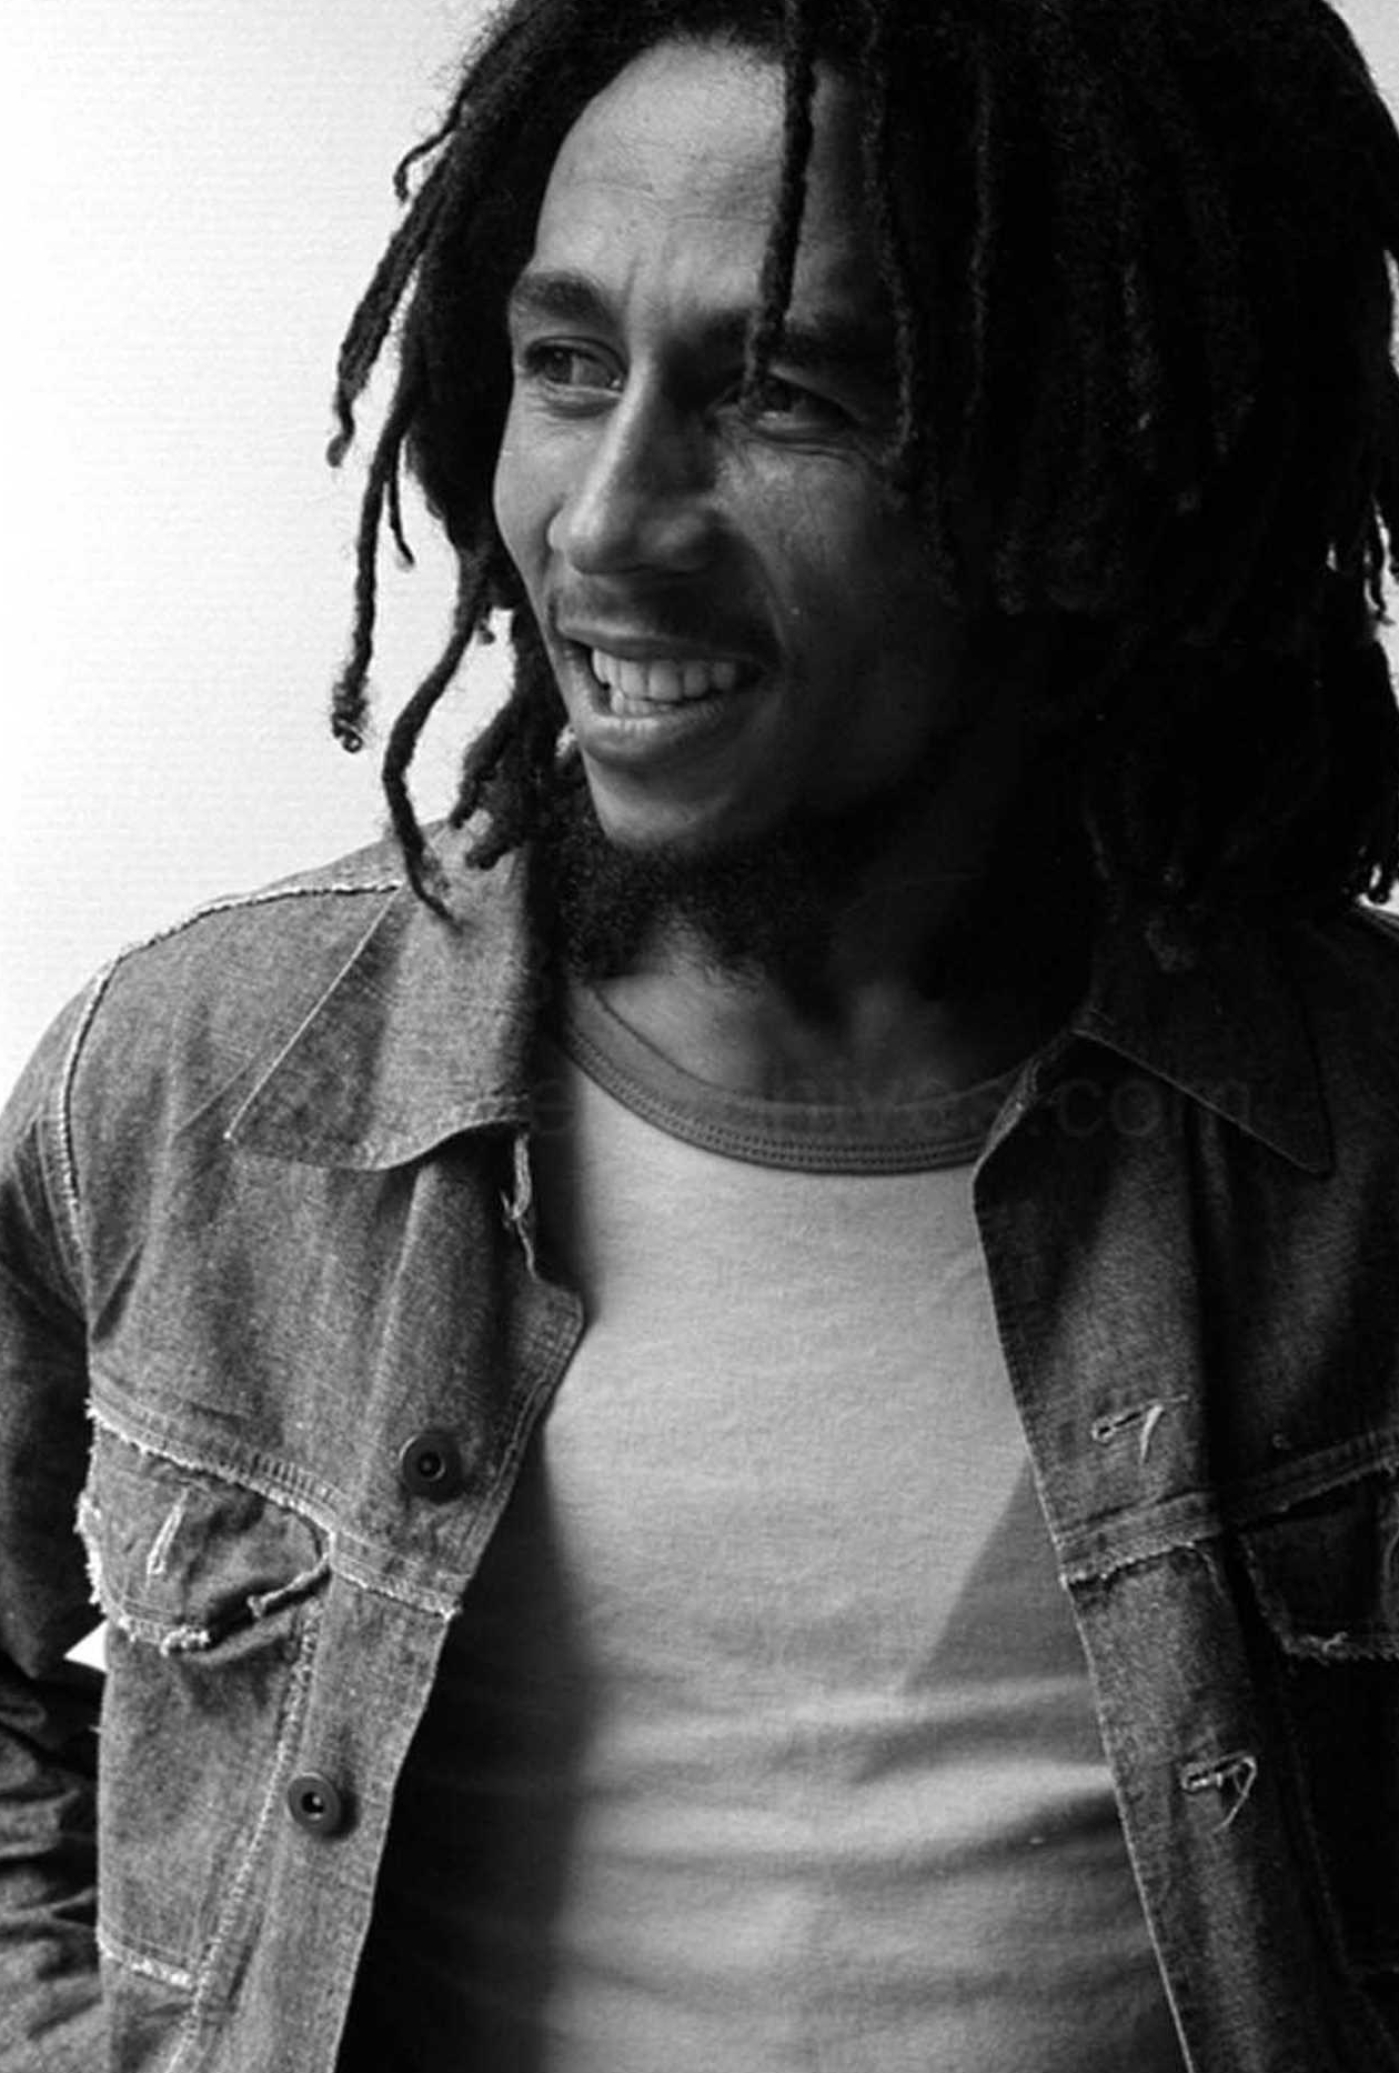 Bob Marley: A Black Jamaican singer and songwriter, 'No Woman No Cry', Monochrome. 1400x2080 HD Wallpaper.